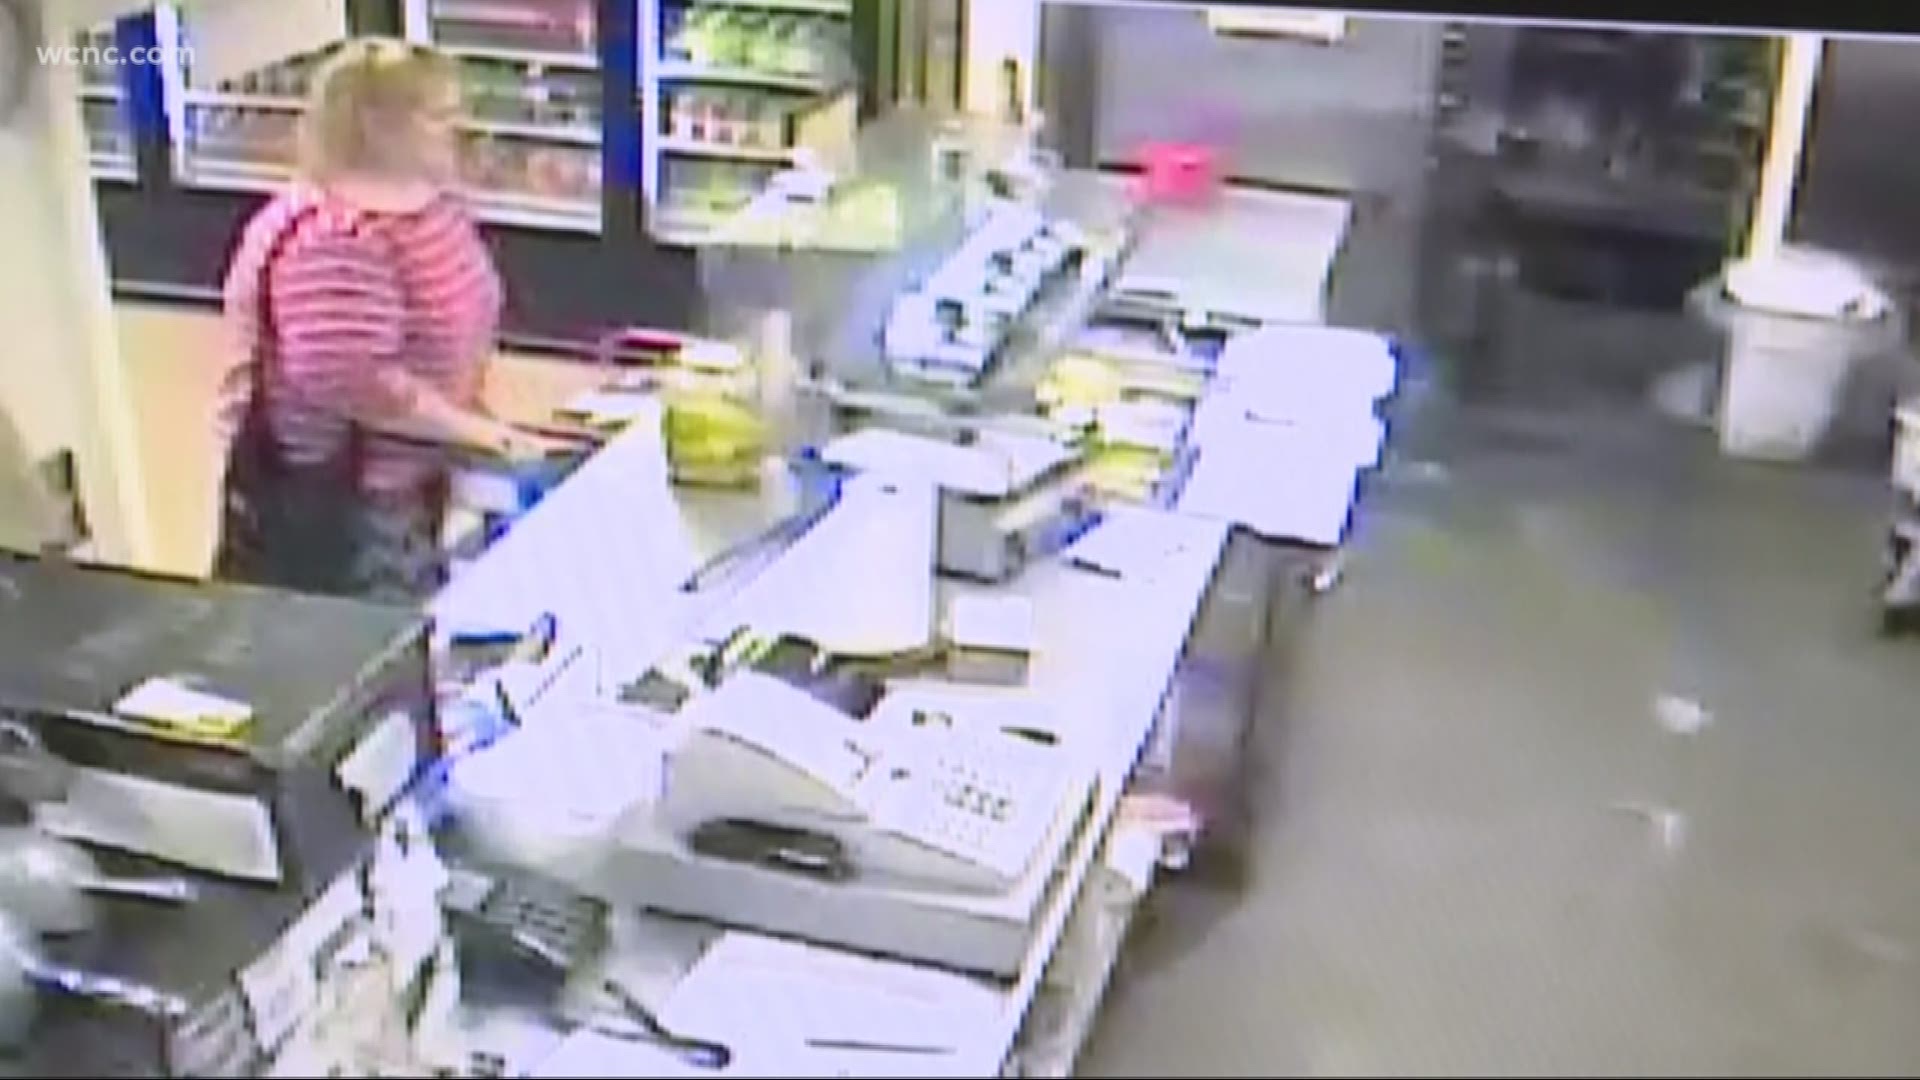 Surveillance video shows a woman stealing the tip jar from a Gastonia restaurant when no one was looking. The workers are hoping it helps identify the woman who stole their hard-earned money.